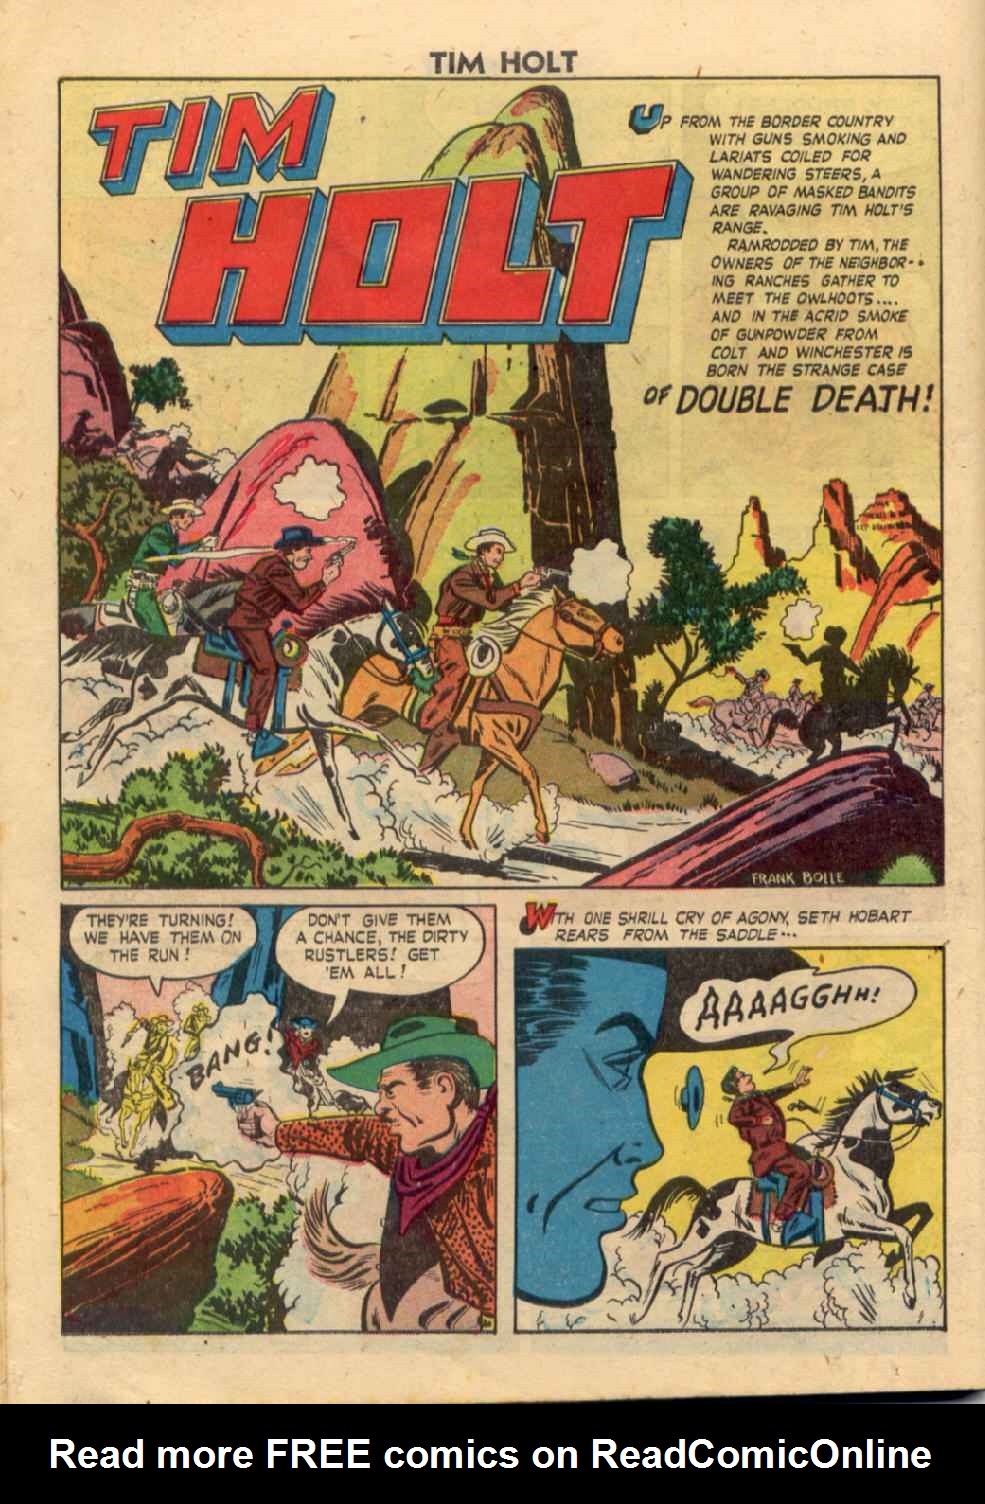 Read online Tim Holt comic -  Issue #10 - 18